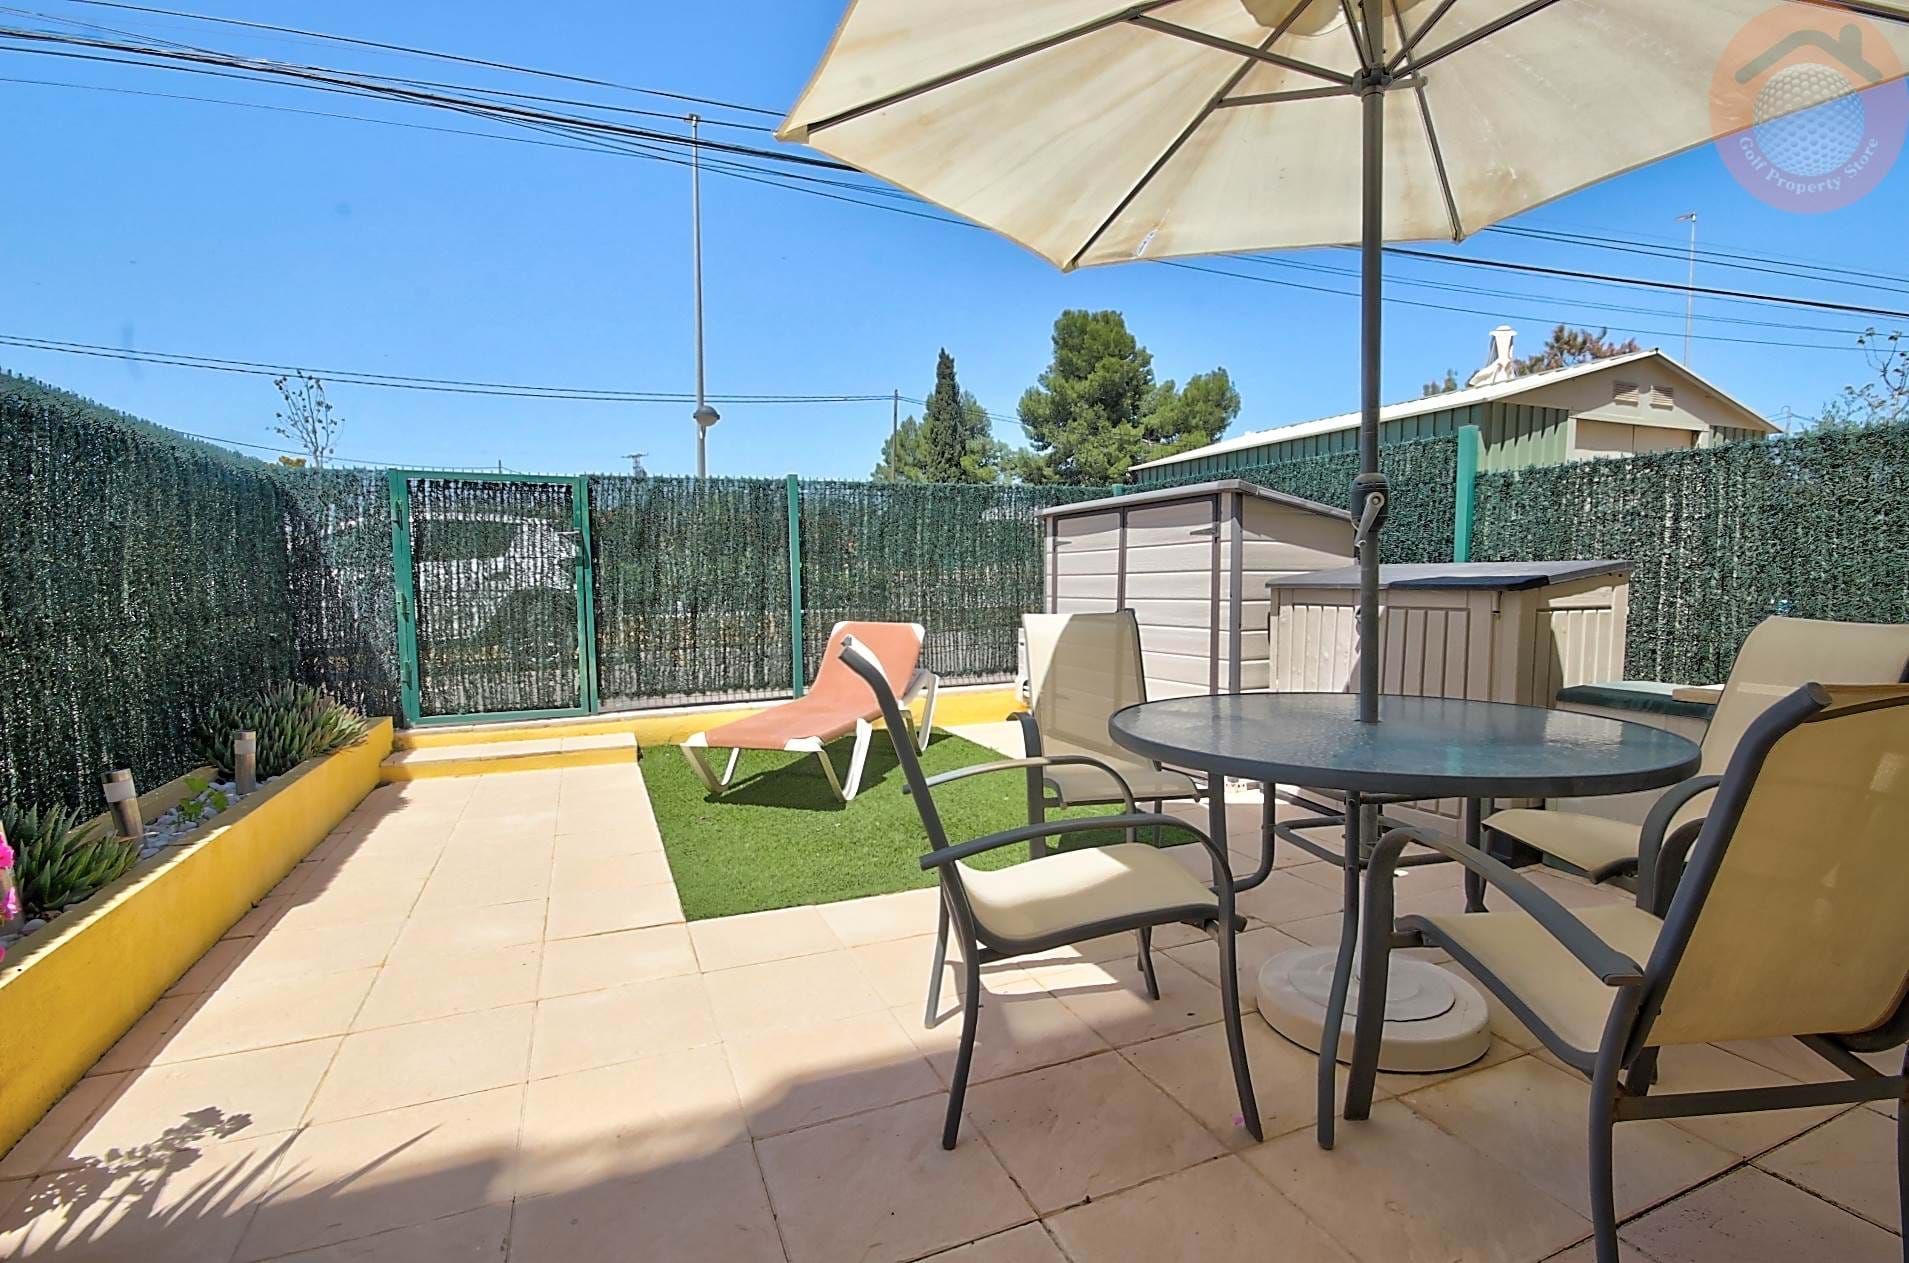 LA TERCIA TWO BED APARTMENT WITH LARGE DUAL GARDENS AND PRIVATE PARKING